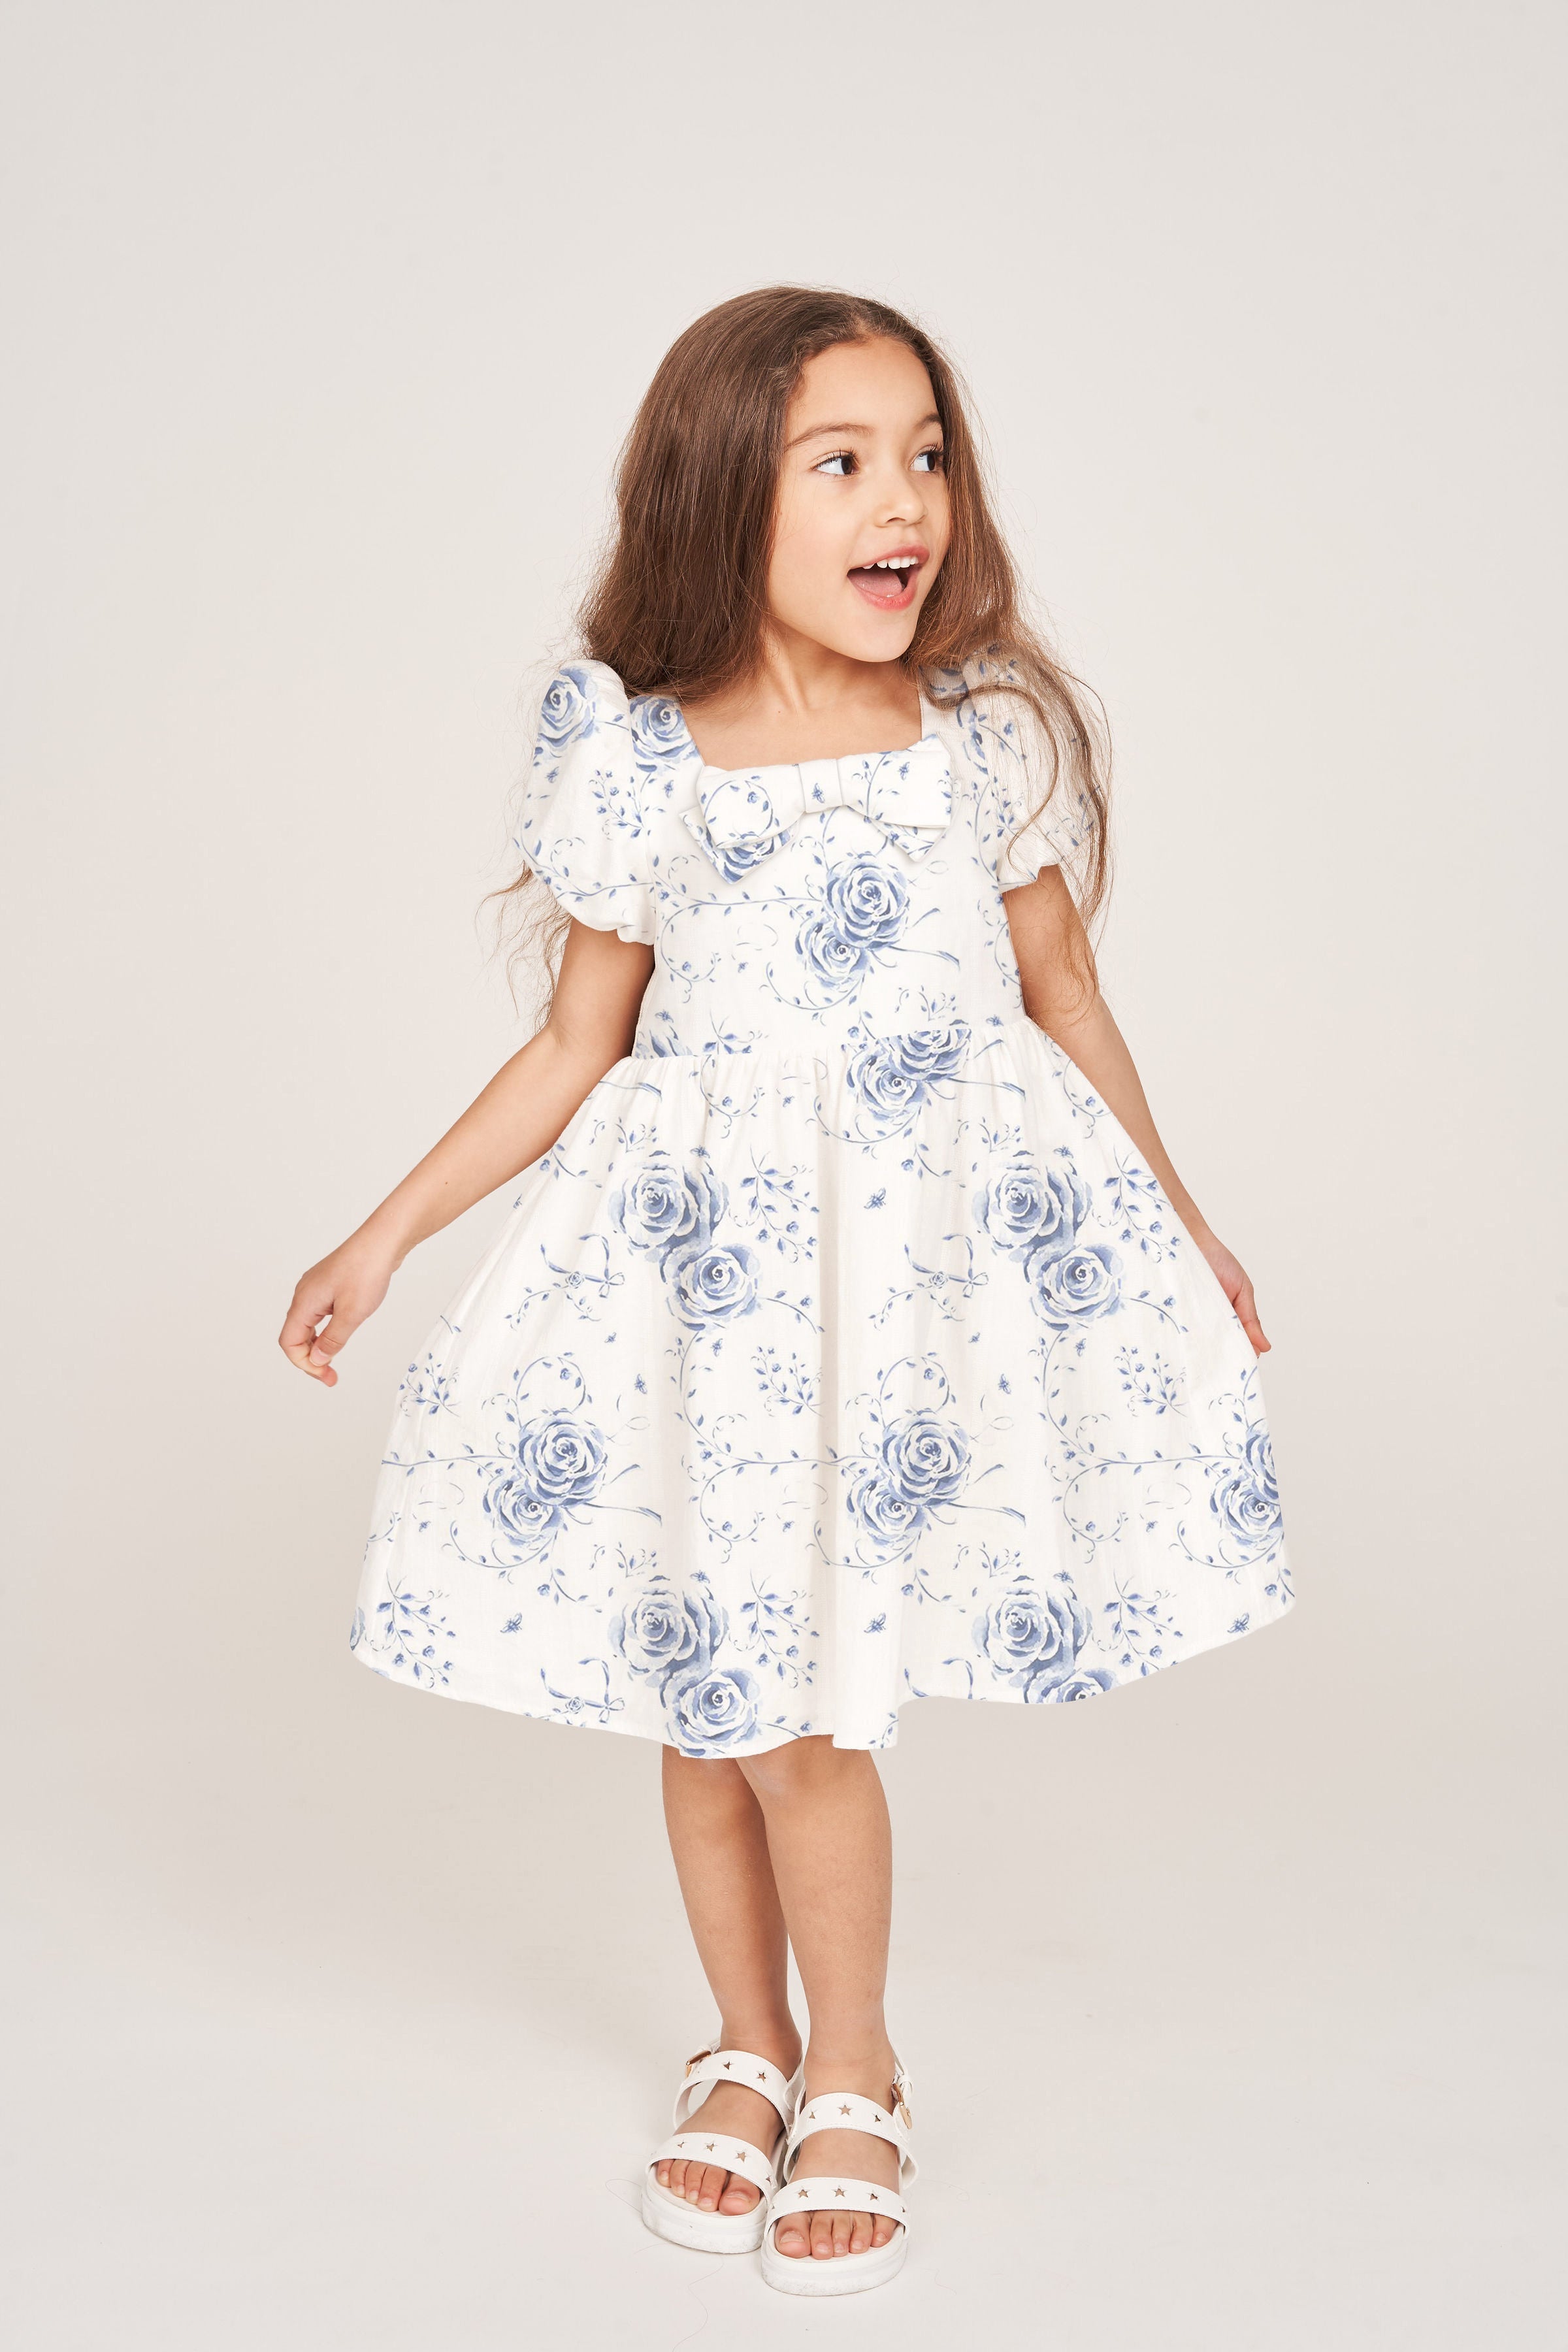 The Kylie Girl Dress by Floraison